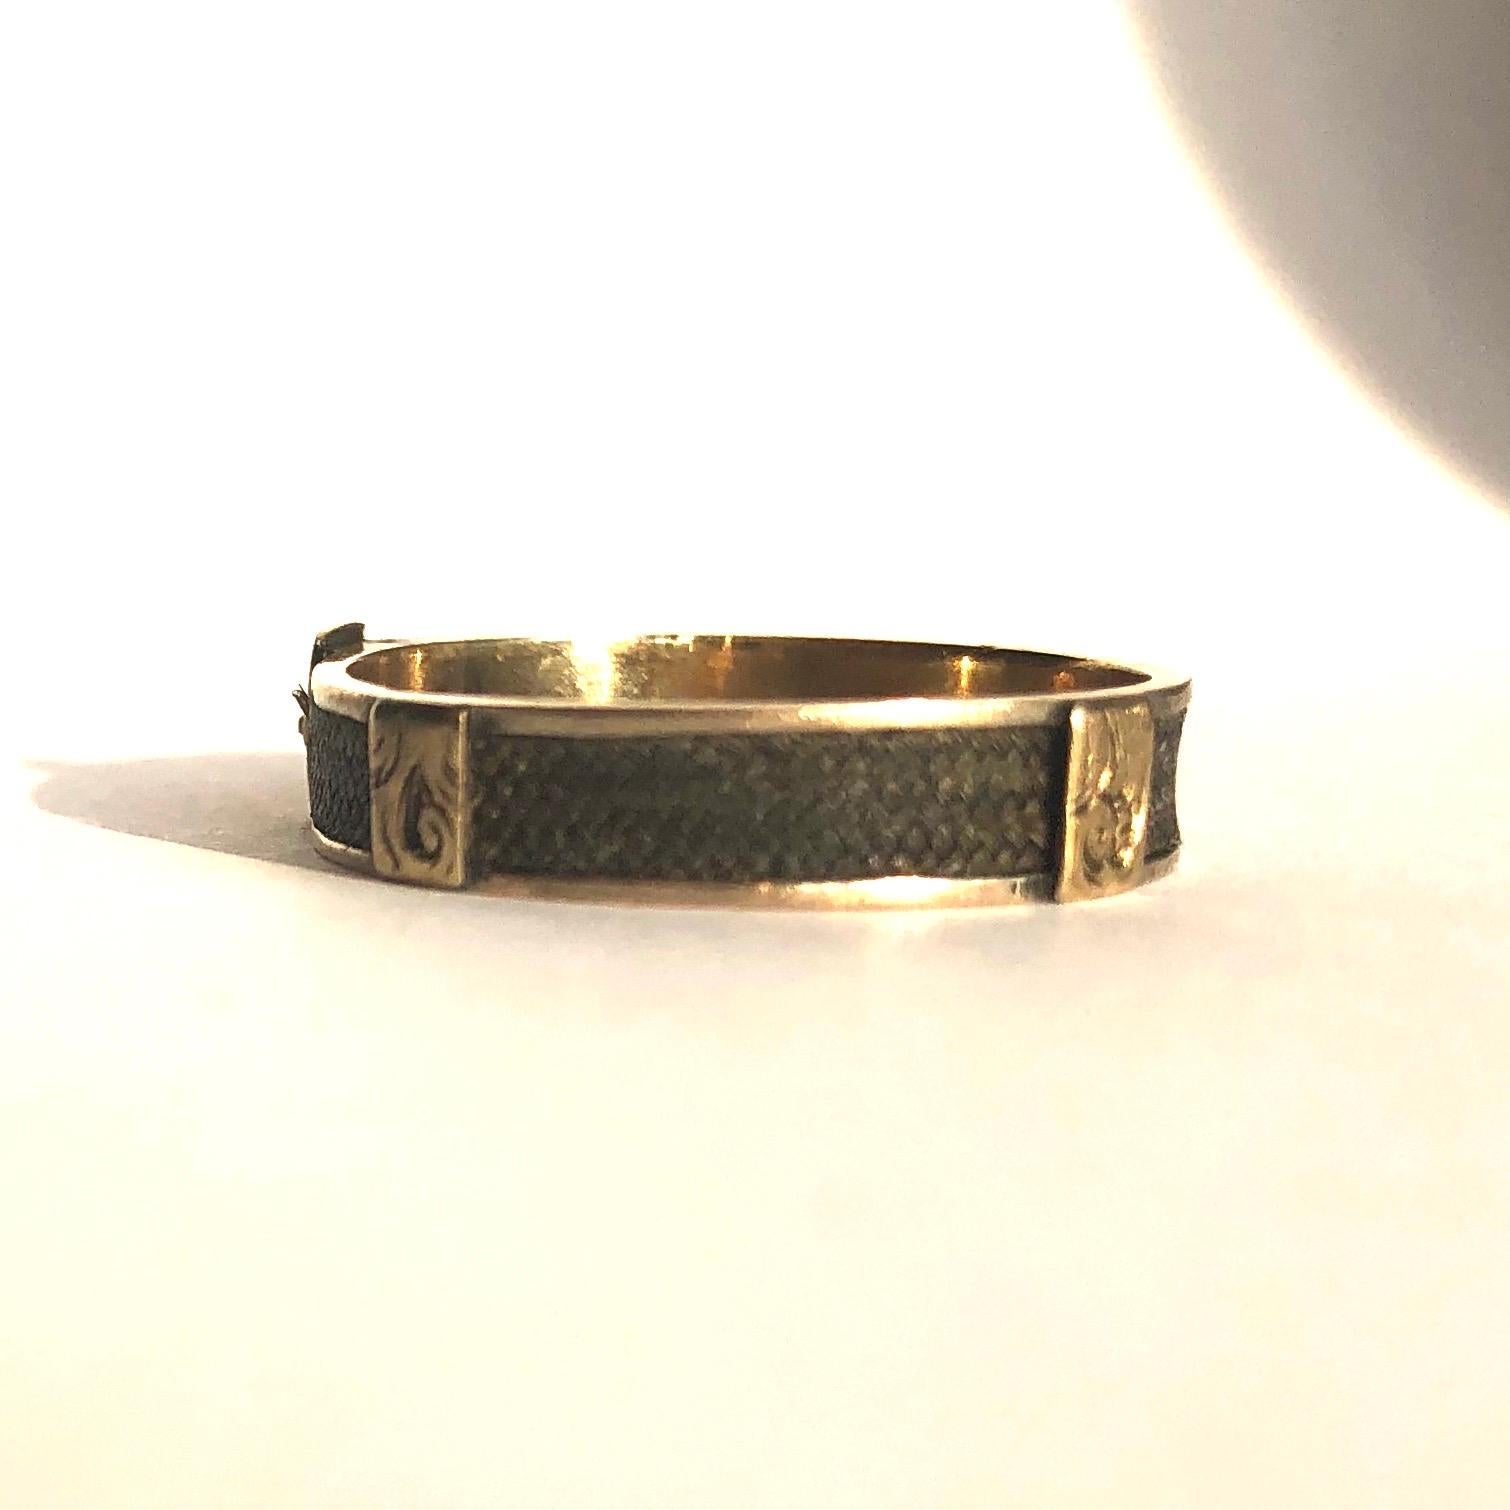 The buckle detail on this band is so fine and intricate with gorgeous engraving. The band holds a fine plait of hair which wraps all the way around the band. 

Ring Size: R or 8 1/2
Band Width: 4mm

Weight: 1.51g